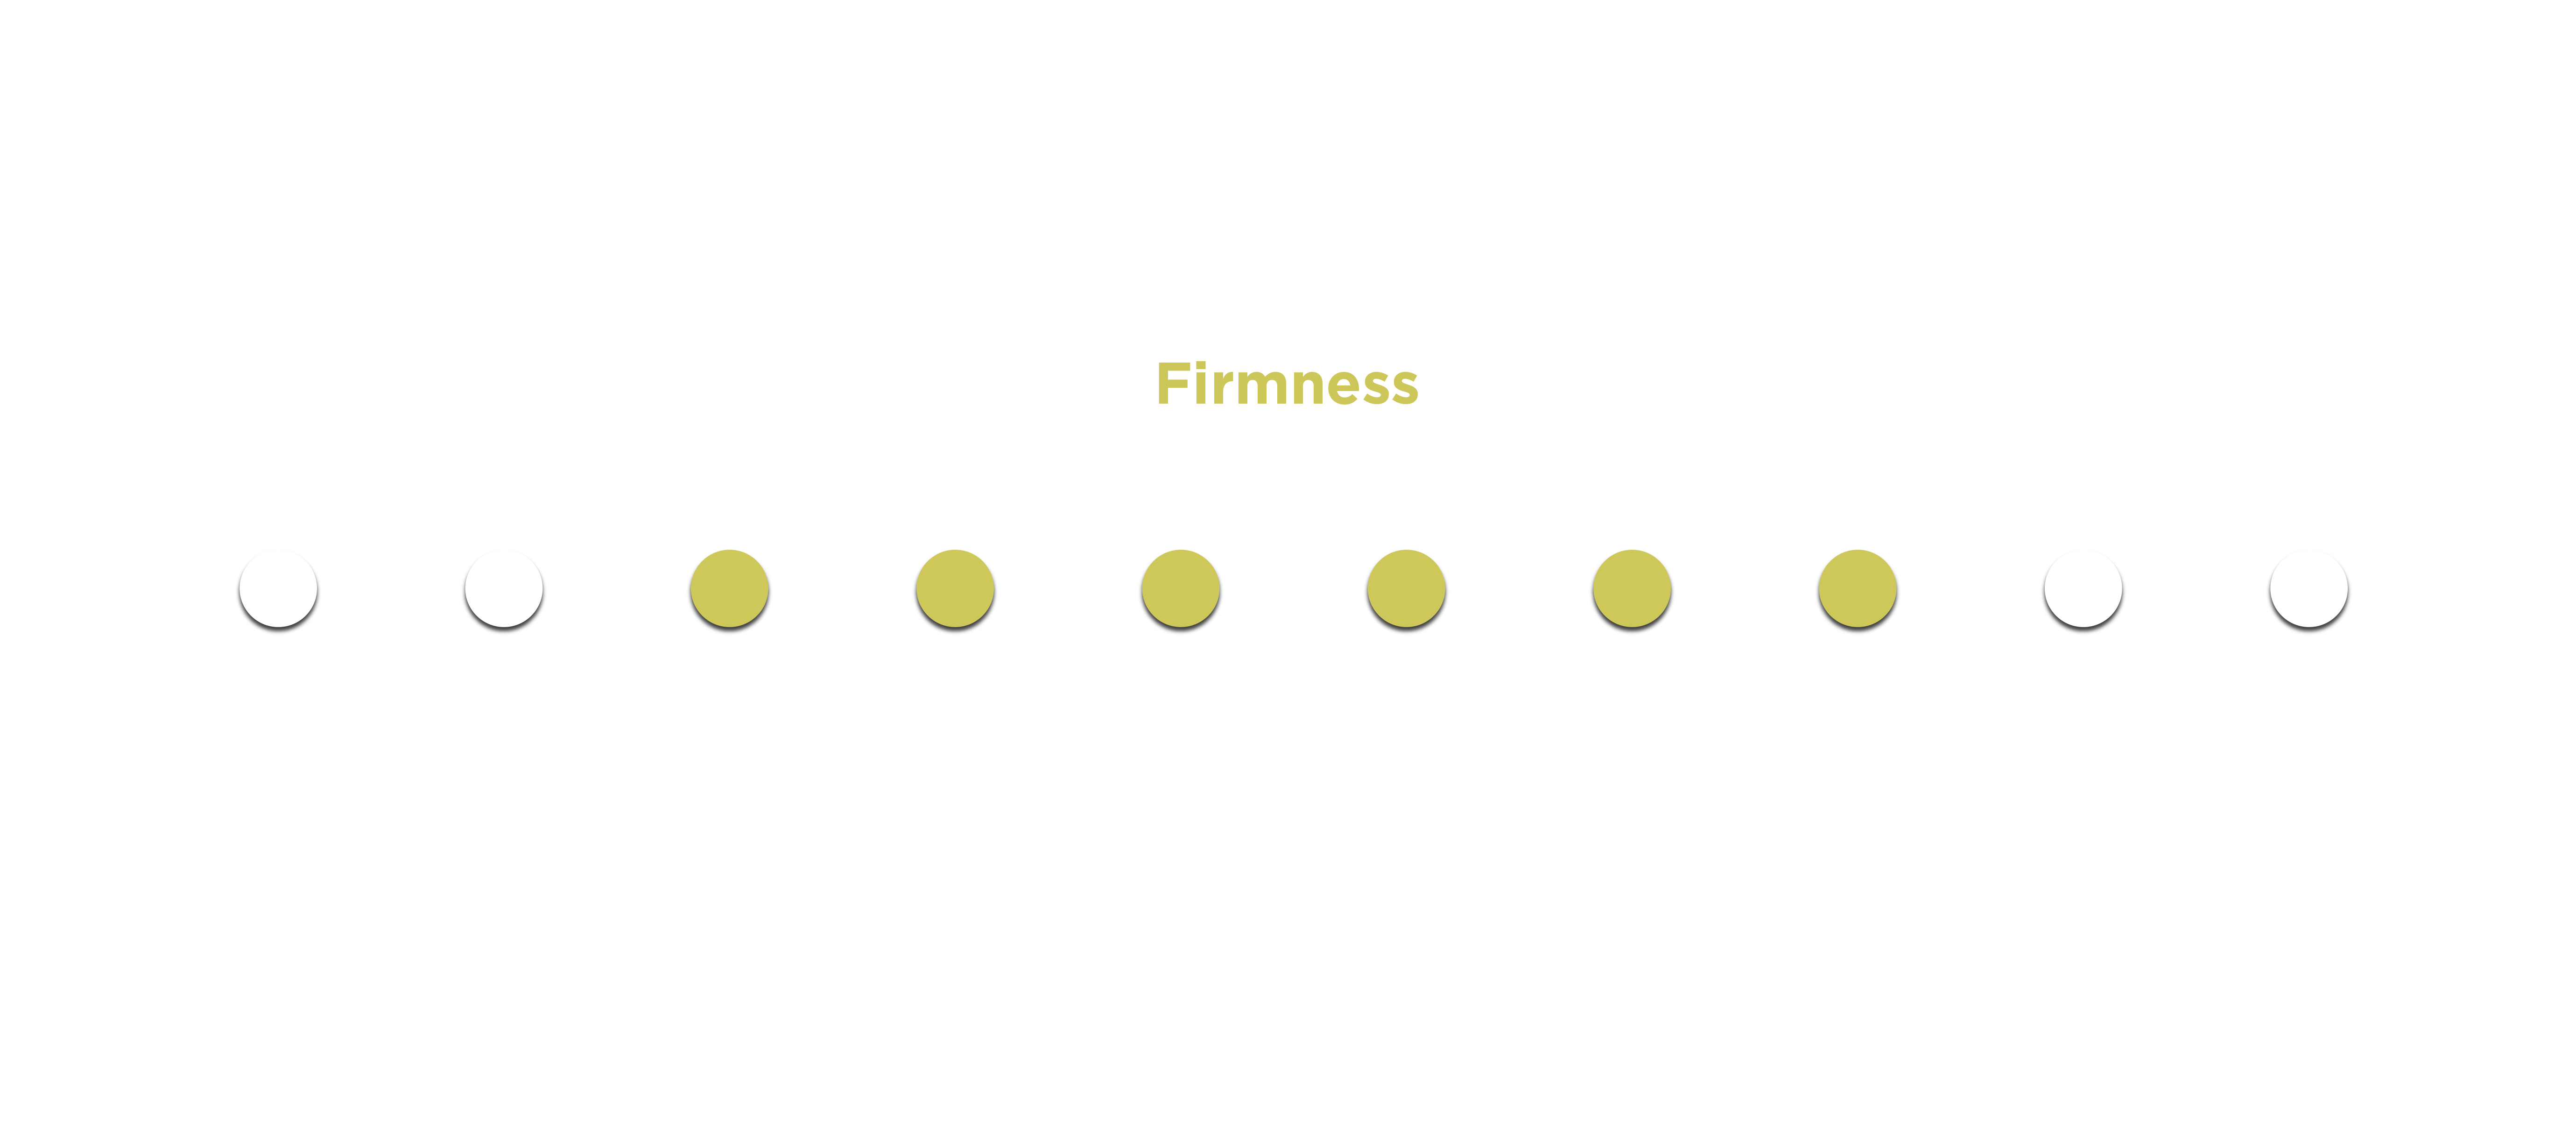 Images of a scale showing firmness of the mattress. indicating honey hybrid mattress is between 4 and 7, 1 being the plushest feel and 10 the firmest